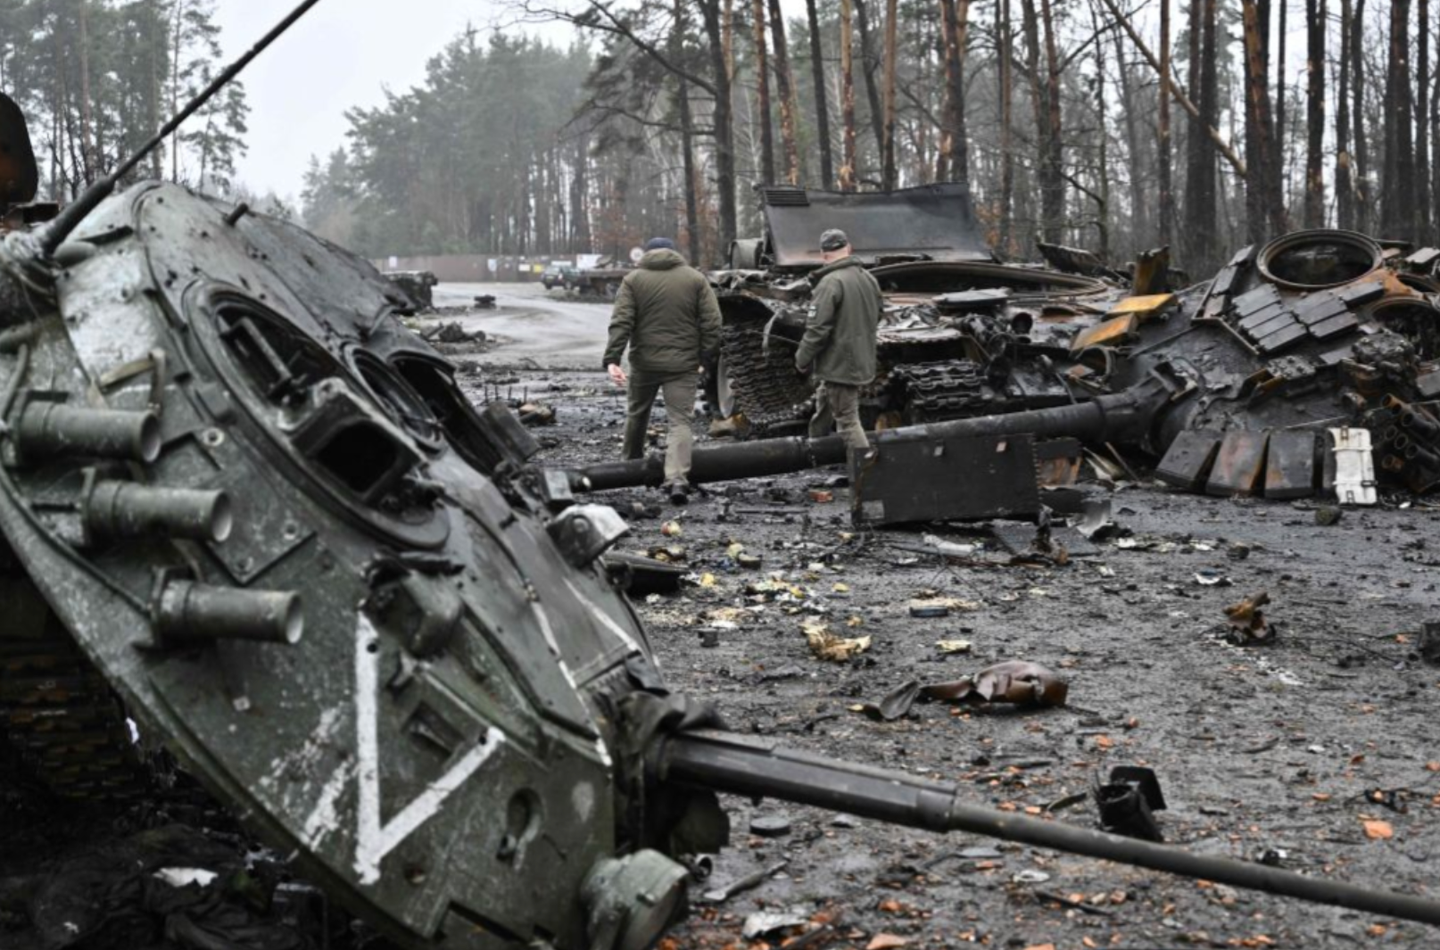 Ukrainian servicemen walk next to destroyed Russian tanks and armored personnel carriers in Dmytrivka village, west of Kyiv, on April 2, 2022. <em>Photo by GENYA SAVILOV/AFP via Getty Images</em>